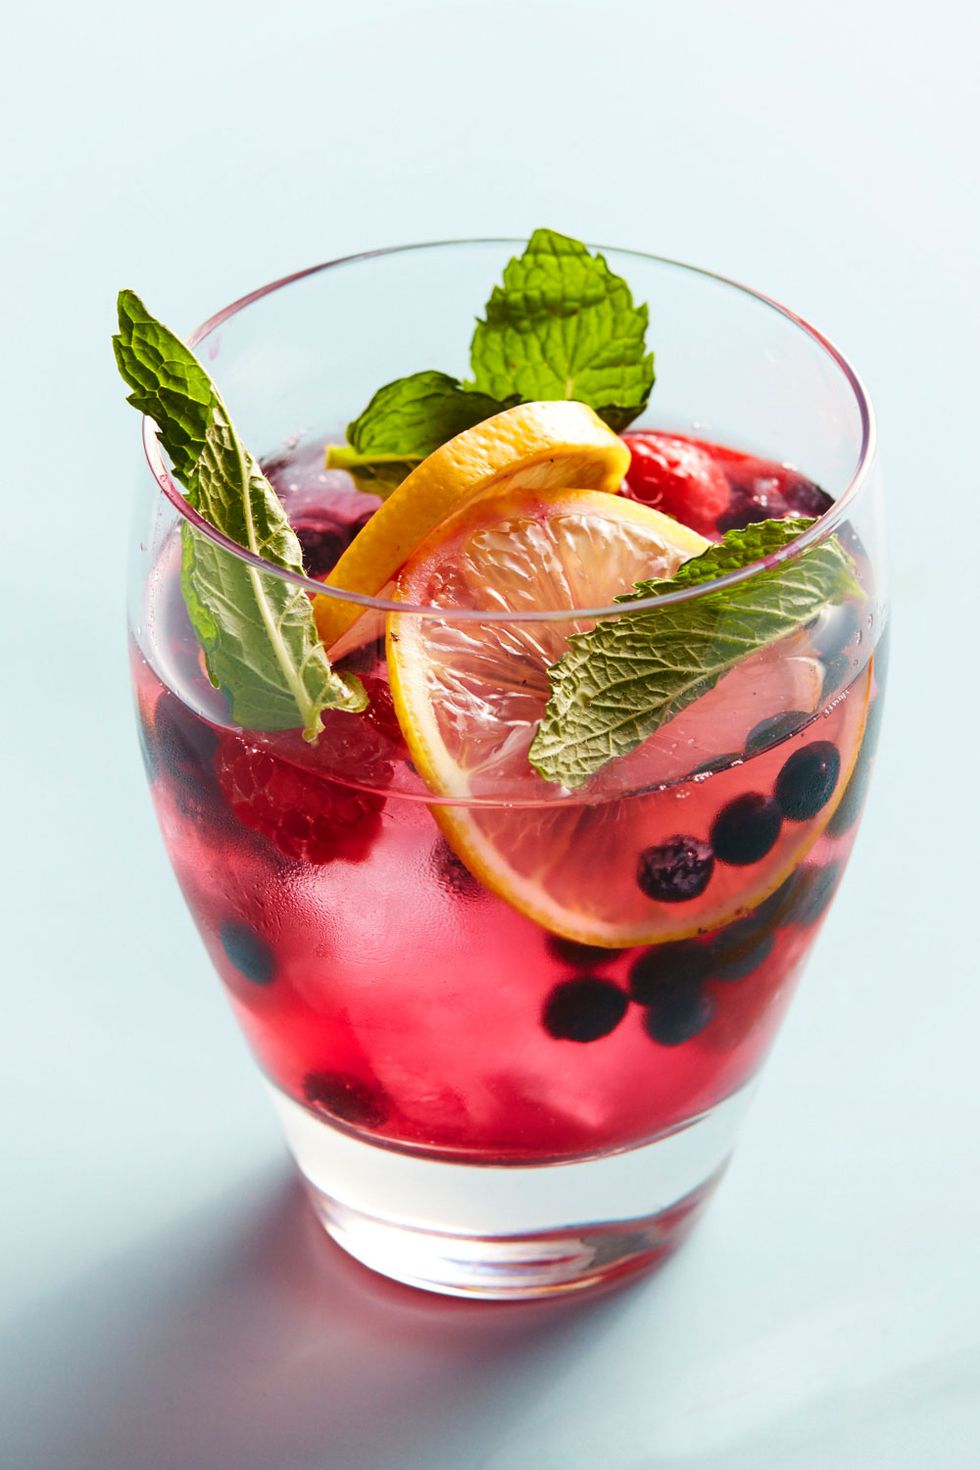 <p><strong>Ingredients:</strong></p><p>2 parts Absolut Vodka</p><p>1 parts Lemonade</p><p>1 part watermelon juice</p><p>Frozen blueberries and strawberries, lemon wheels, mint sprigs</p><p><strong>Directions:</strong></p><p>Combine all ingredients over large chunks of ice. Decorate with the above garnishes.</p>